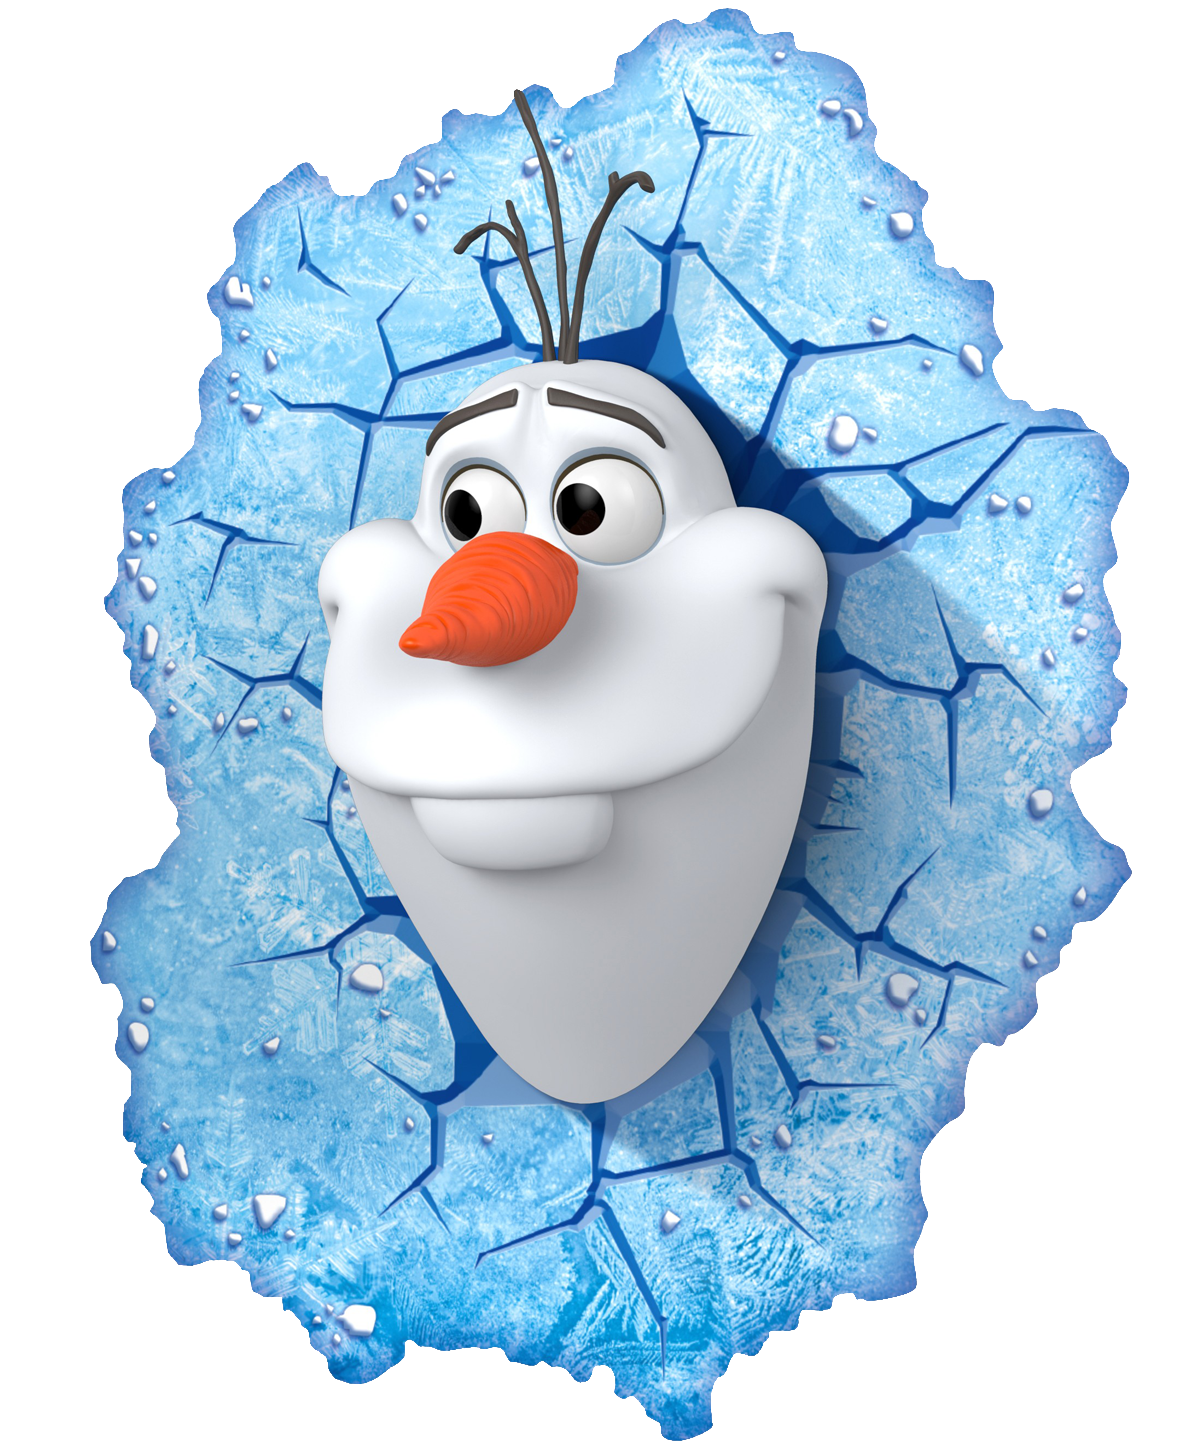 Download Frozen Olaf Picture HQ PNG Image FreePNGImg.